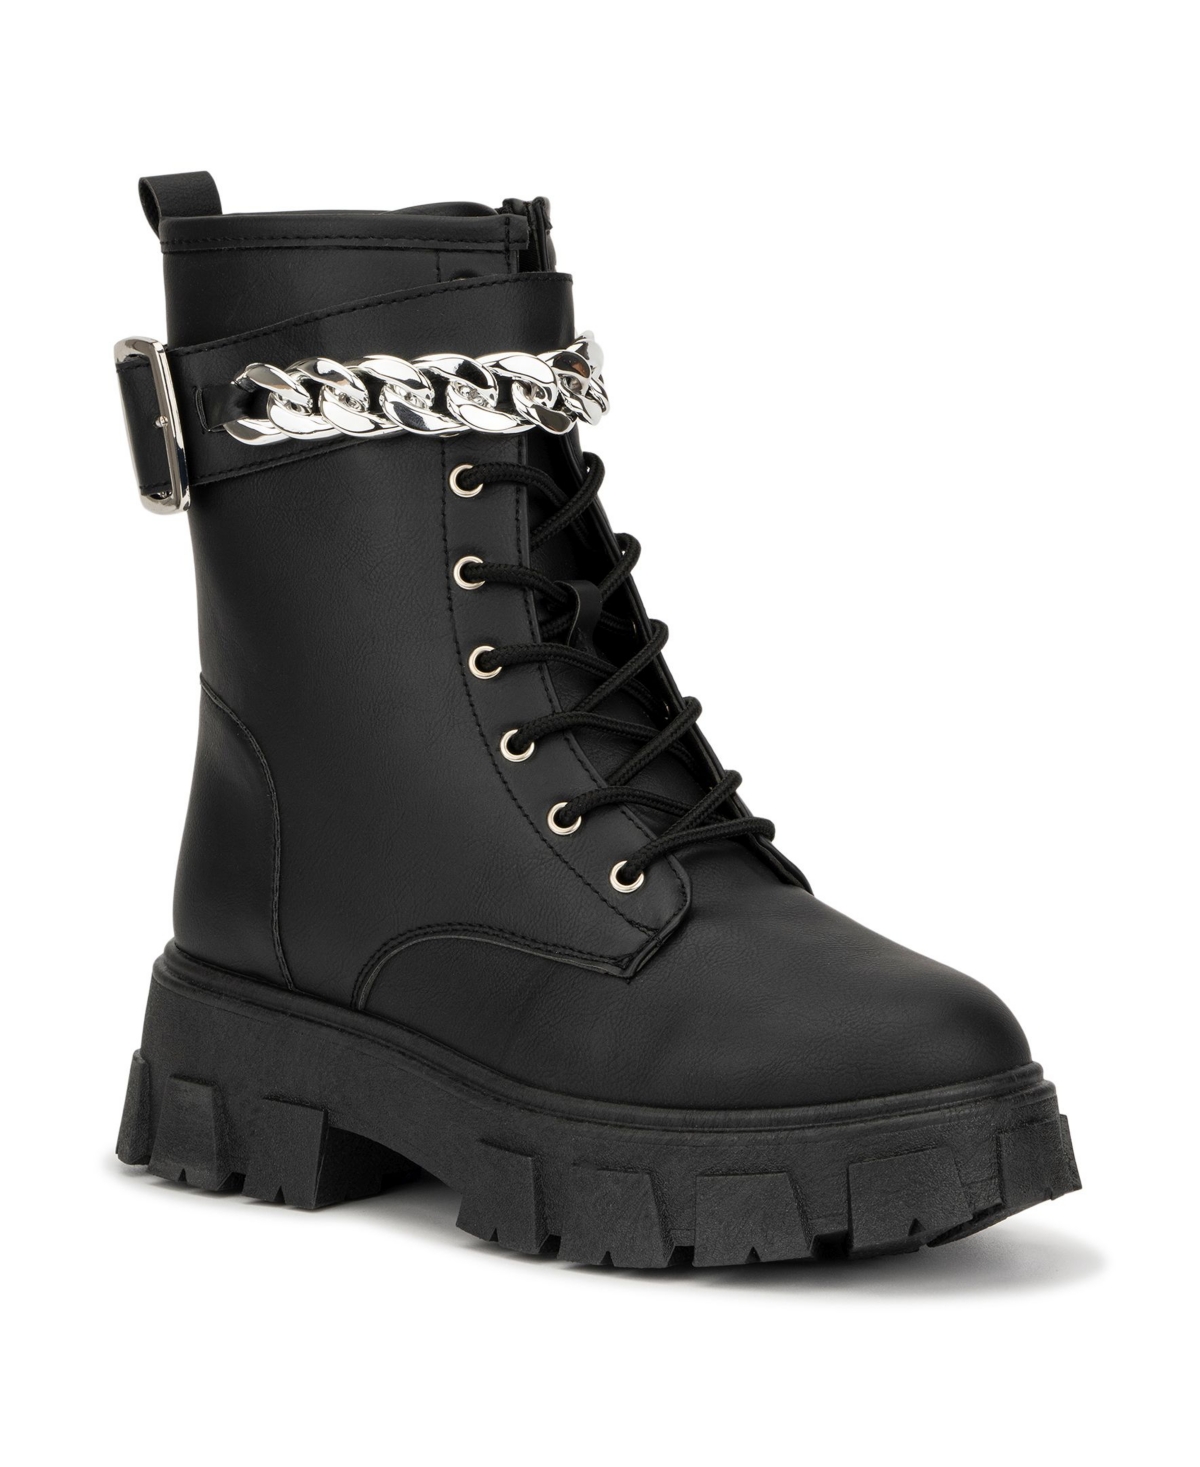 Shop Now For The Olivia Miller Women's Ava Lug Sole Combat Booties ...